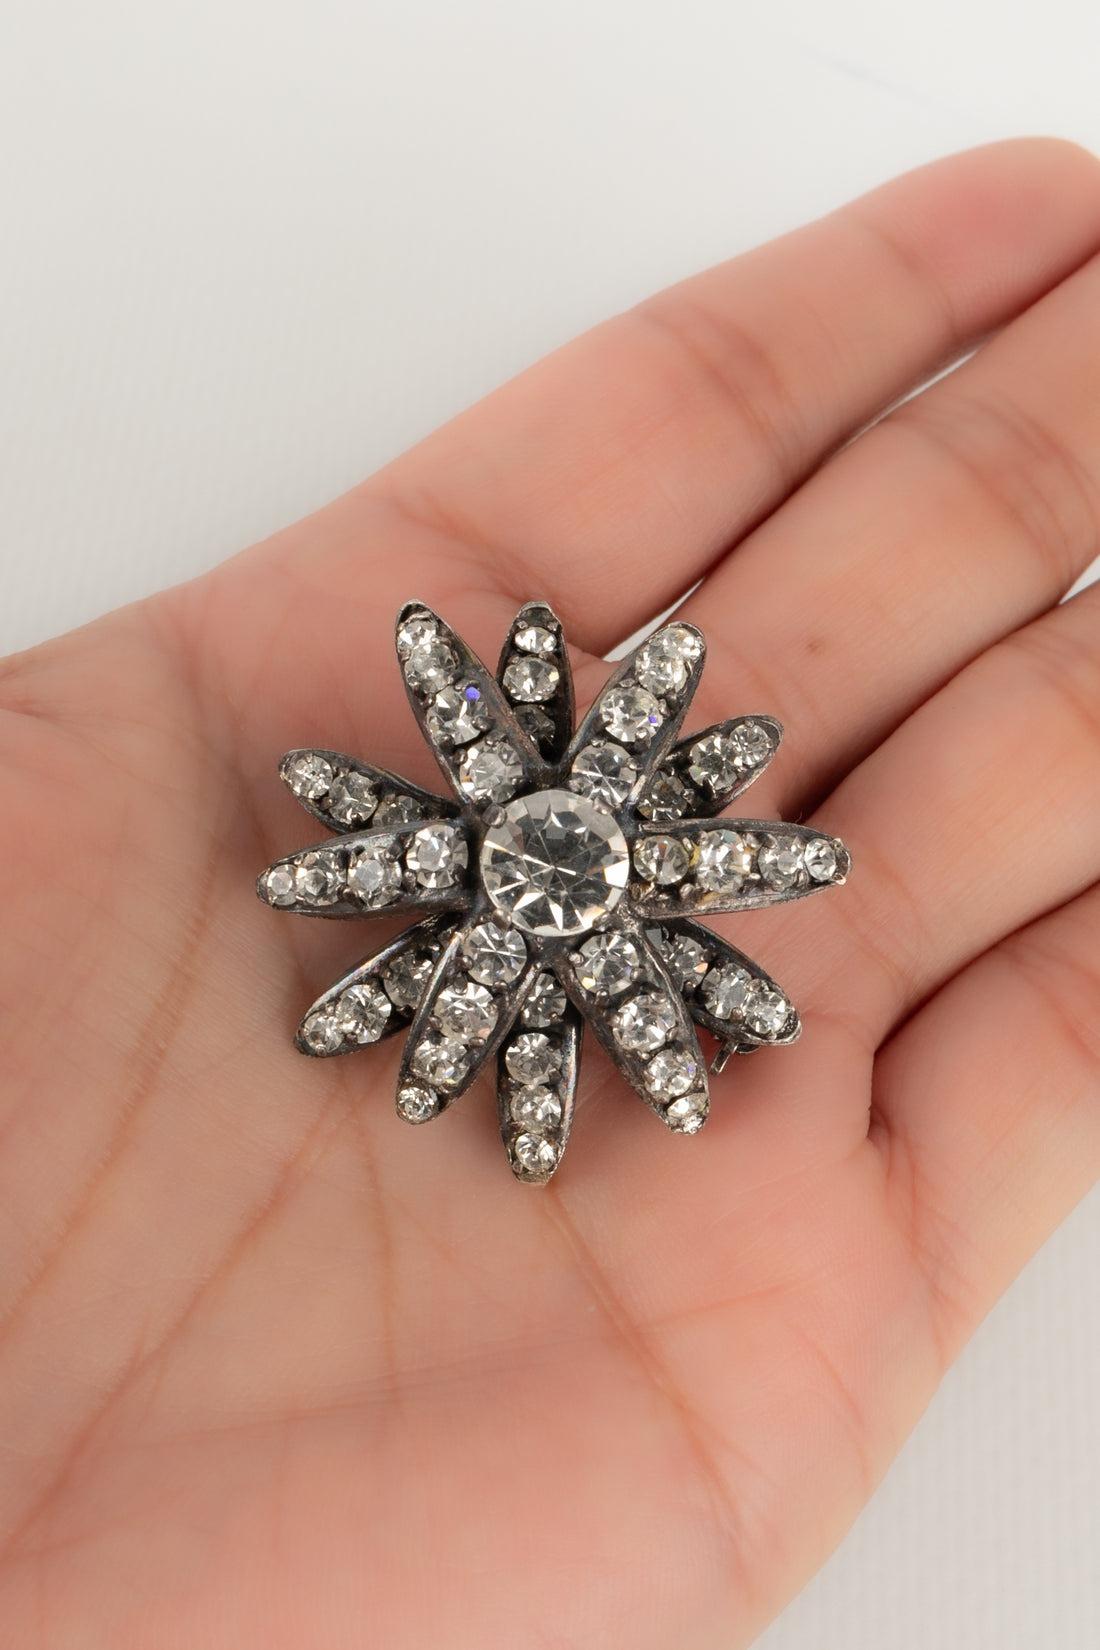 Chanel - (Made in France) Dark silvery metal brooch ornamented with rhinestones.

Additional information:
Condition: Very good condition
Dimensions: Height: 3.5 cm

Seller Reference: BRB159